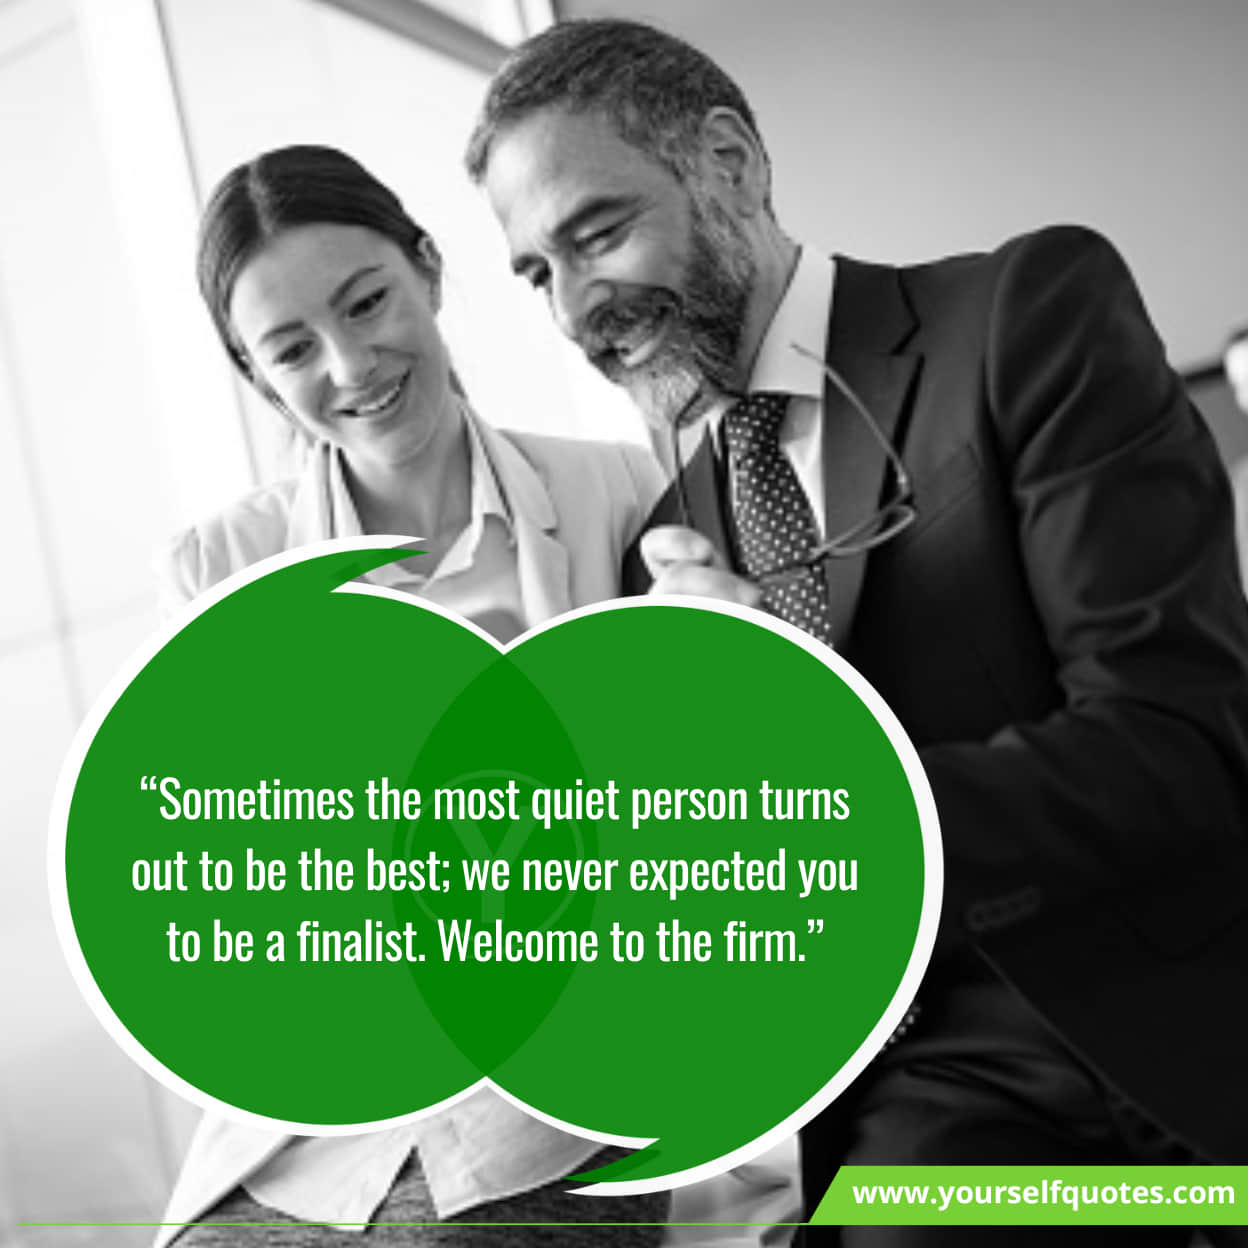 Cheery Welcome Messages For New Boss | YourSelf Quotes